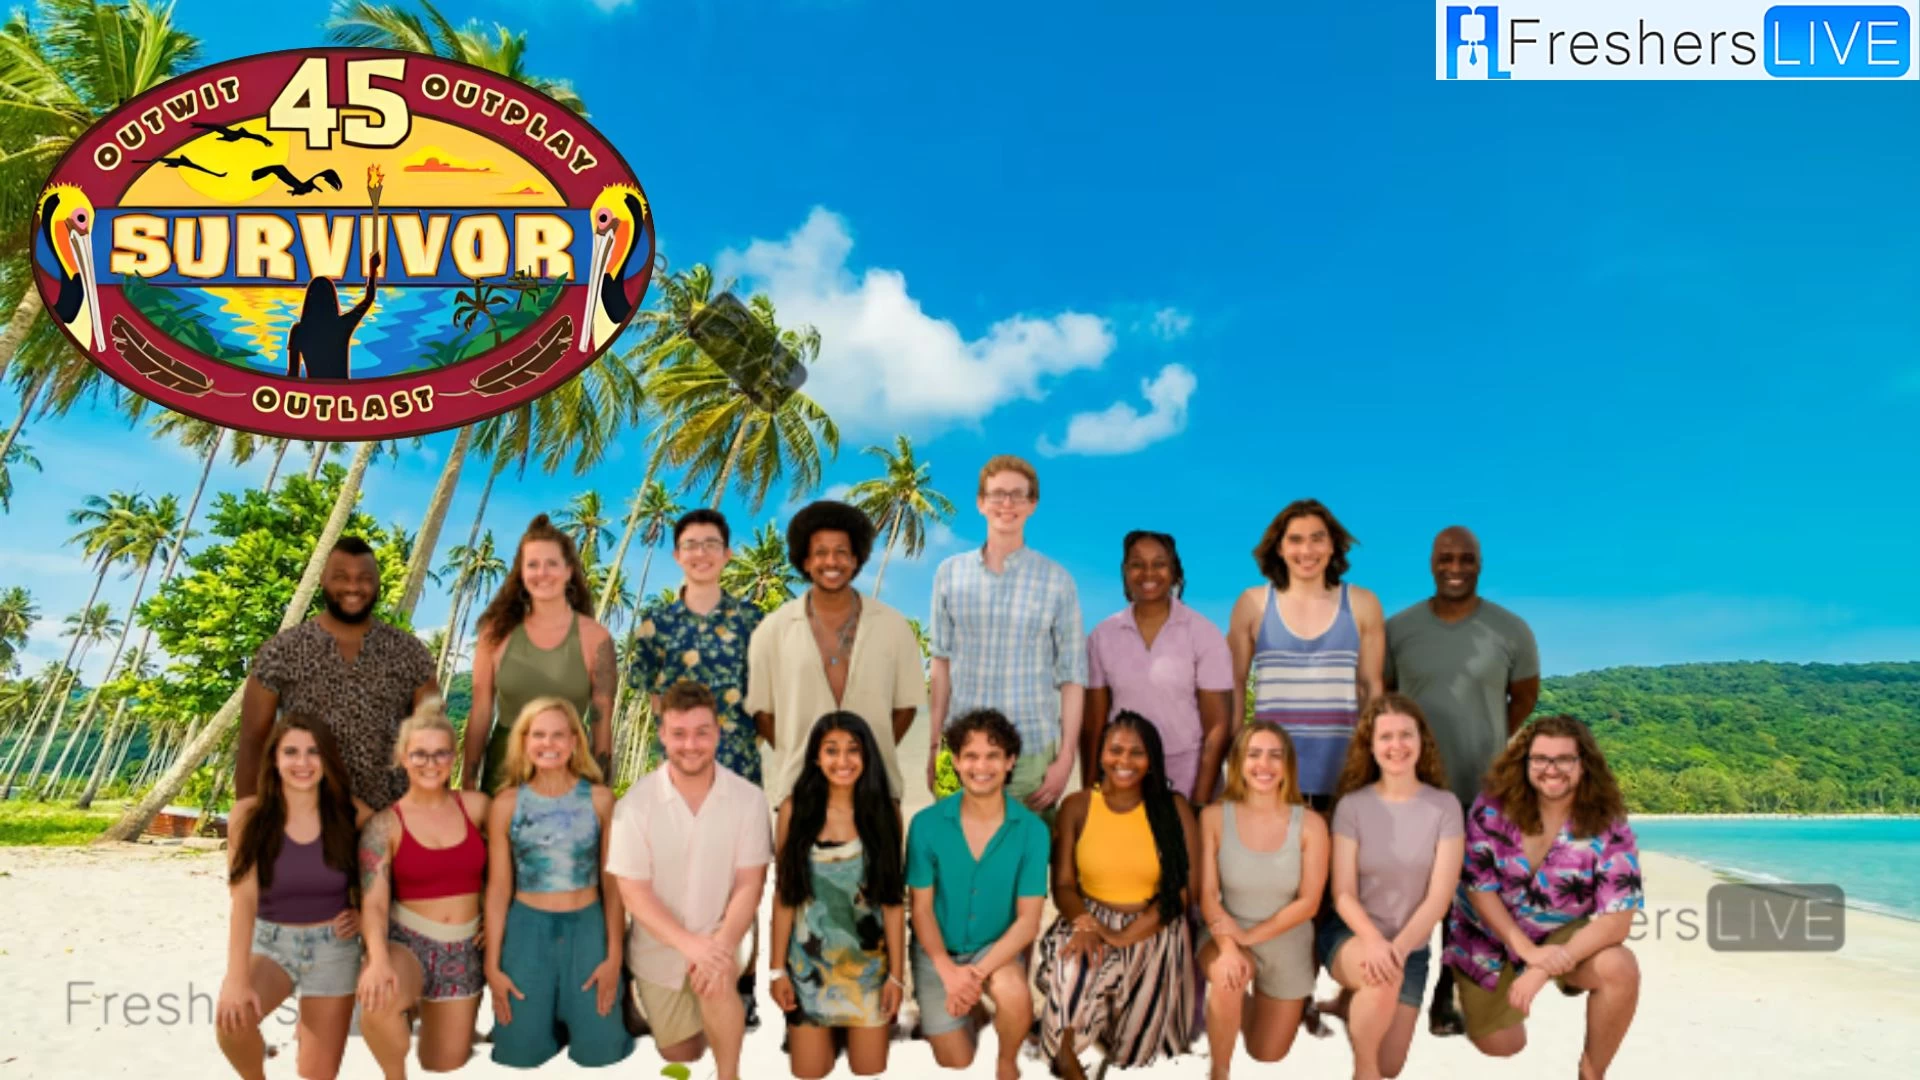 How to Watch the Season Premiere of 'Survivor' Tonight? What Time Does 'Survivor' Start?